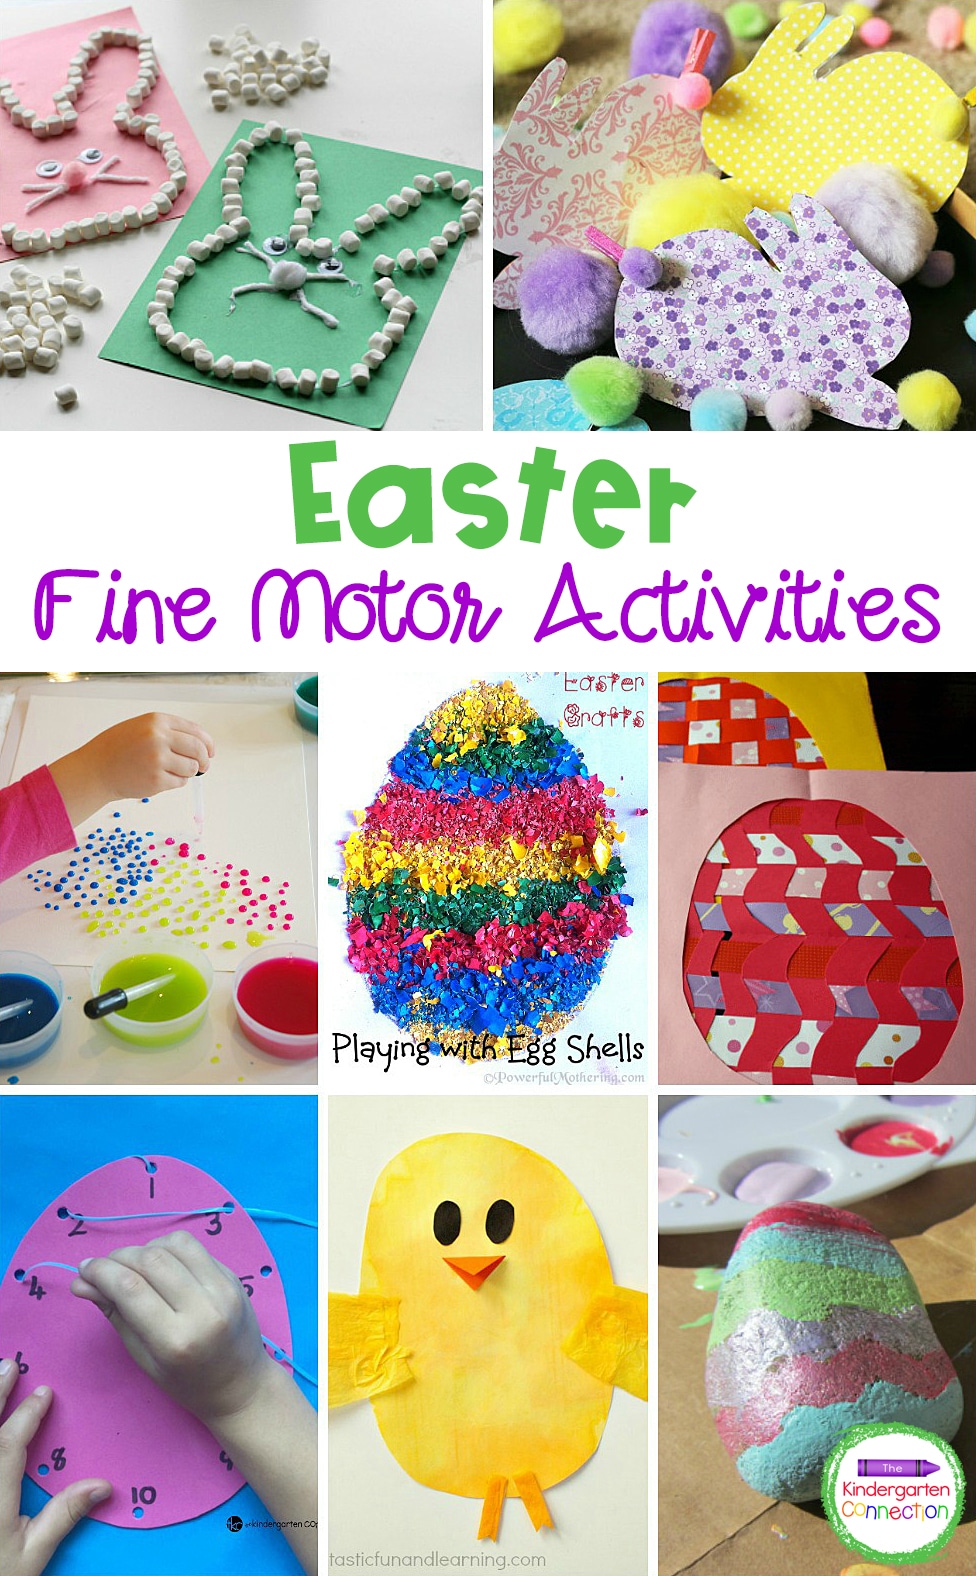 These adorable fine motor Easter activities are perfect for kids who are still working on developing essential fine motor skills!